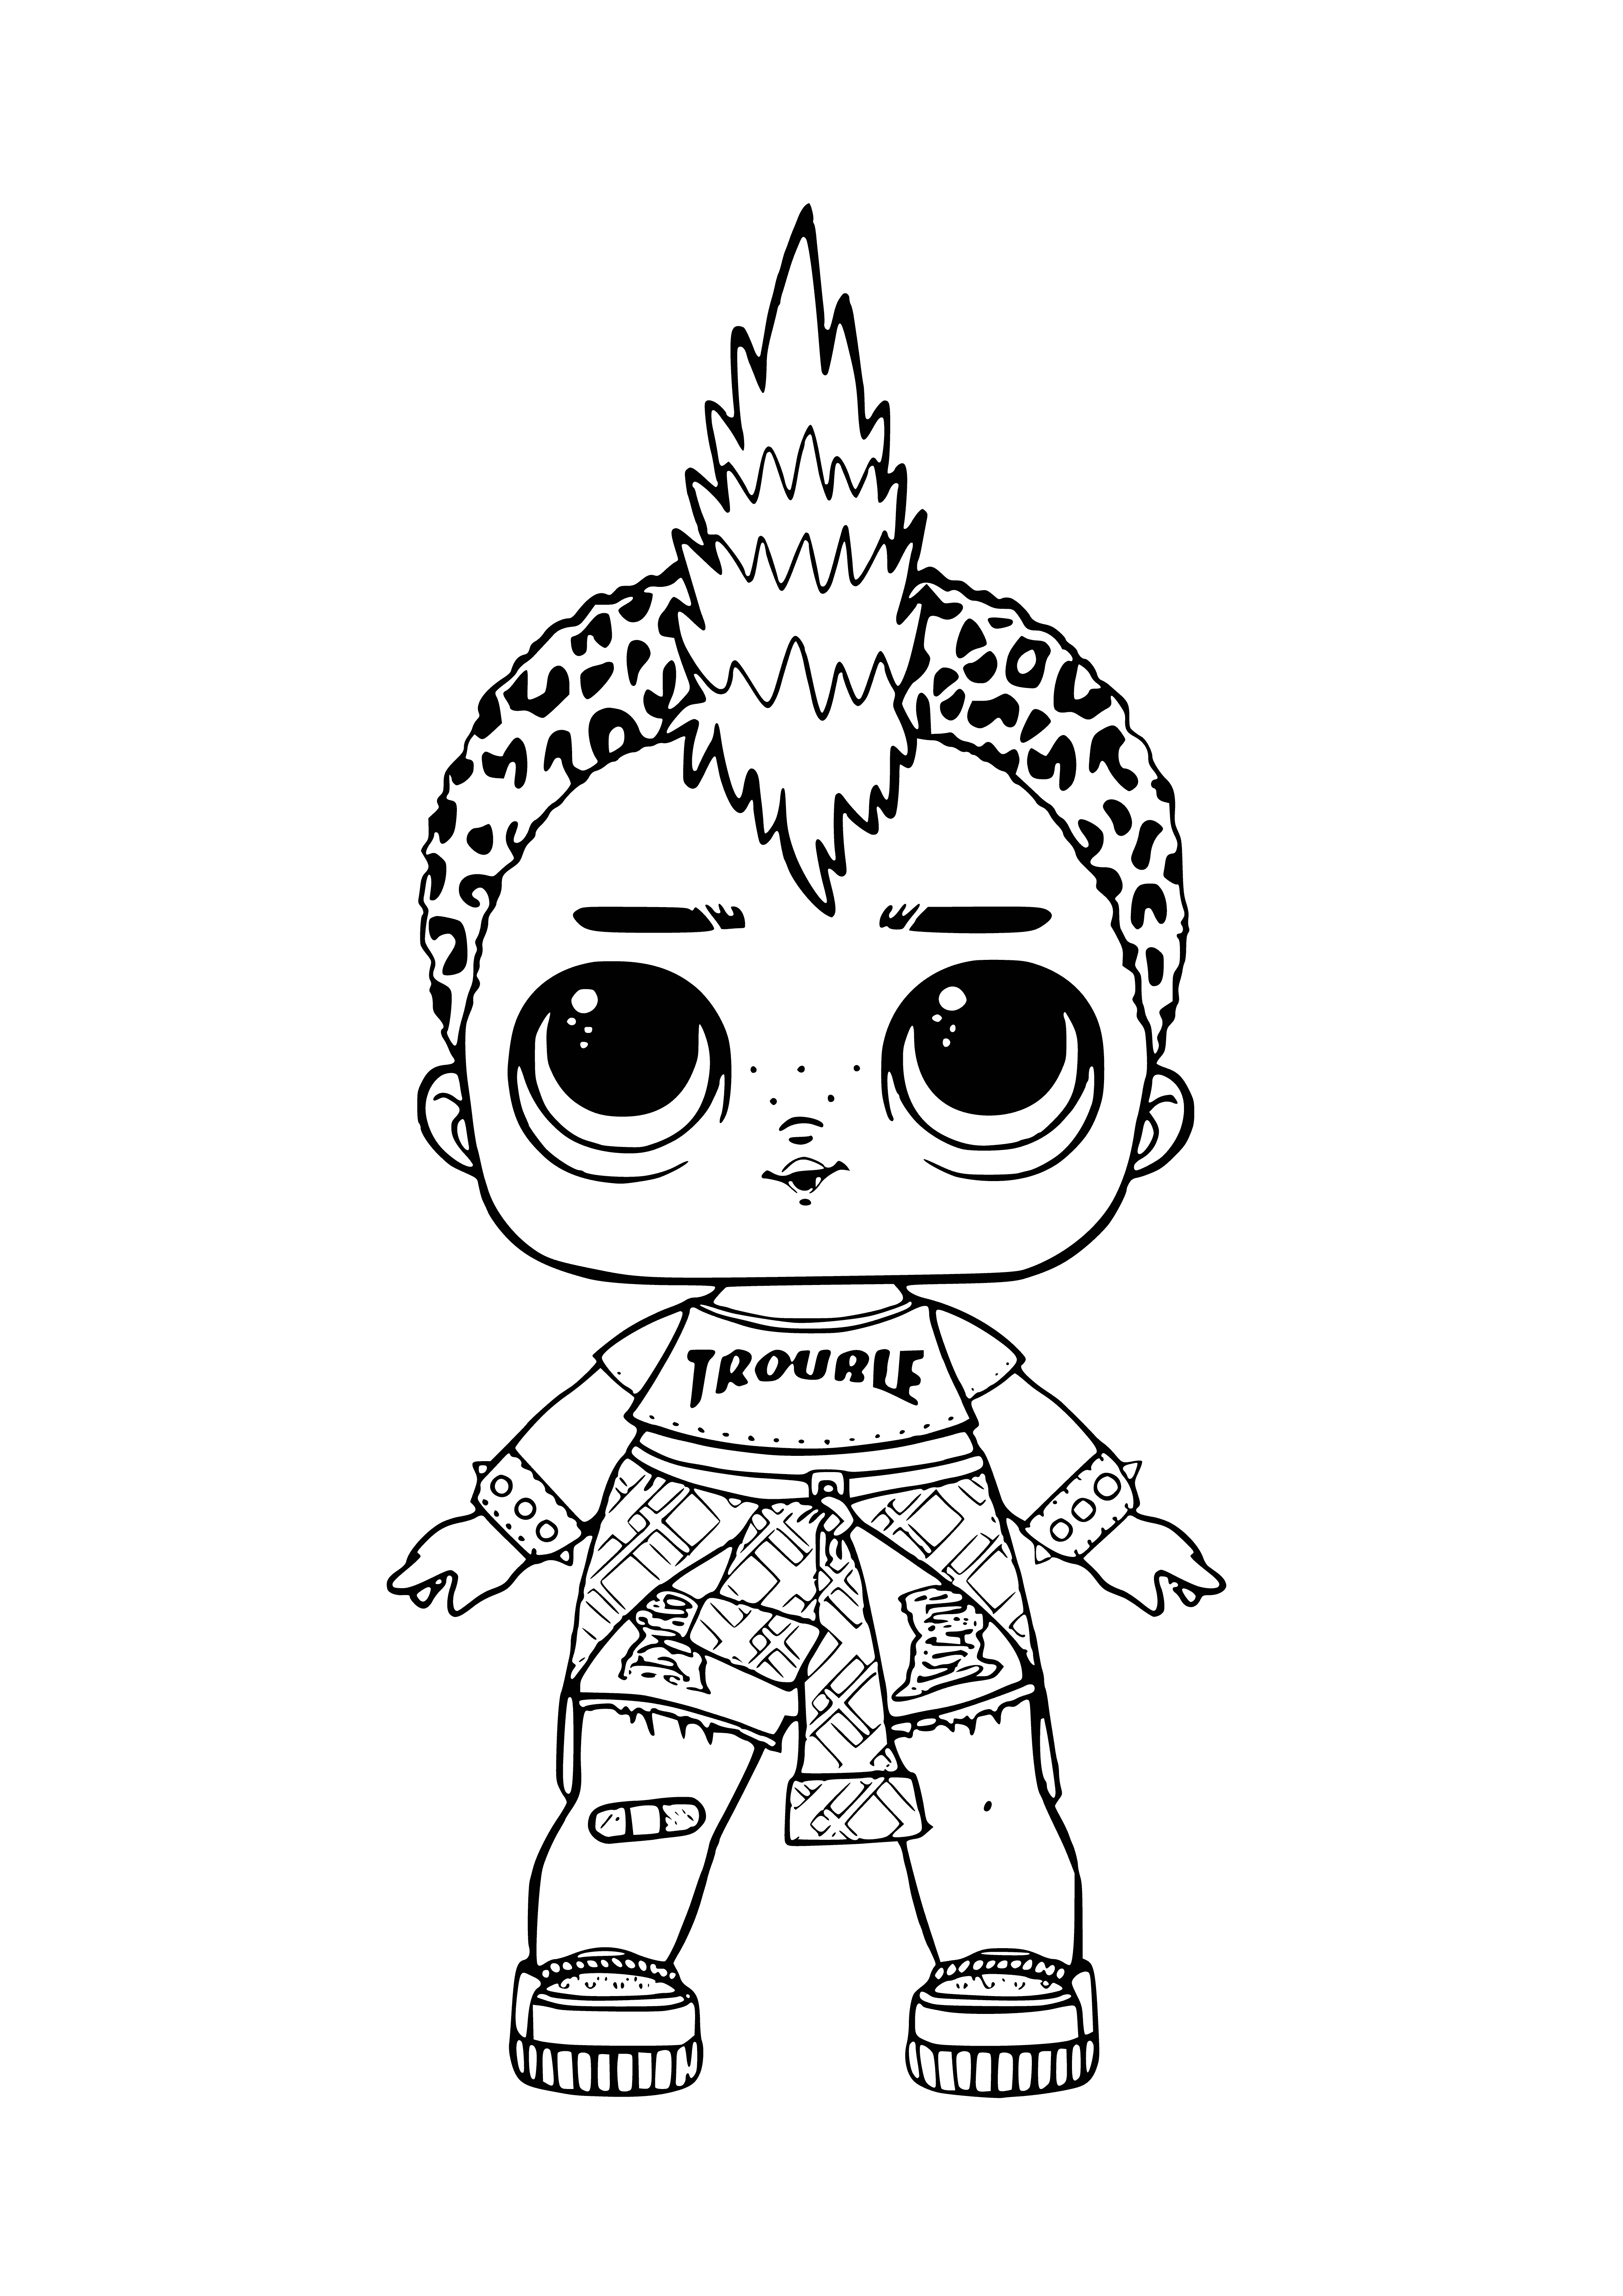 coloring page: Cartoon punk boy makes funny face with "LOL" in speech bubble on blue background for confetti pop.